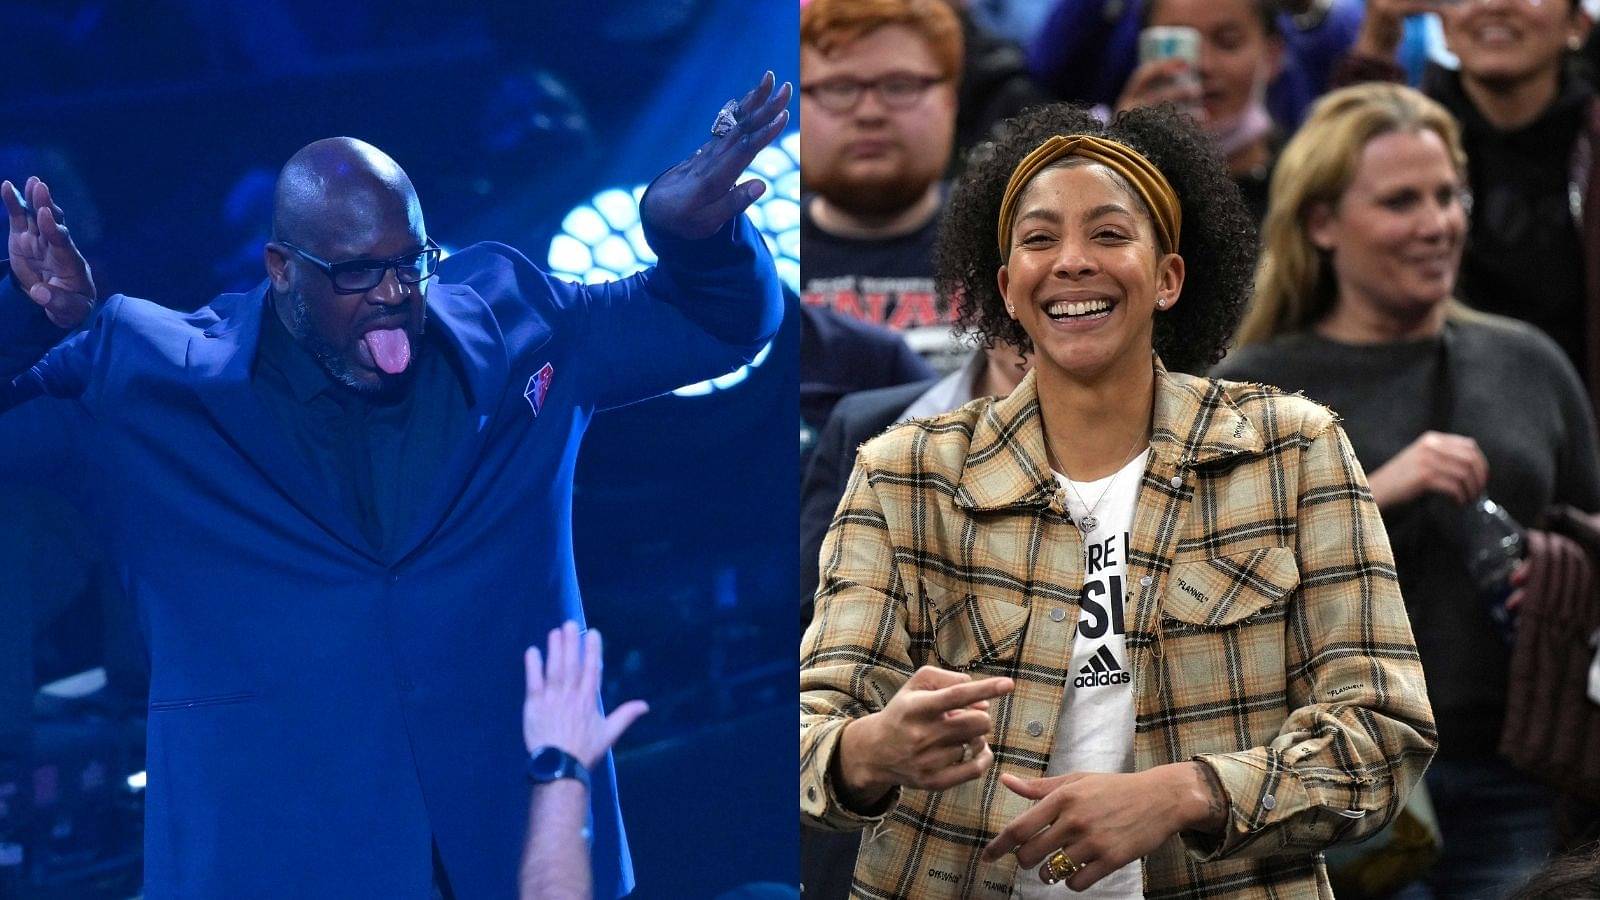 "Shaquille O'Neal if you don't come with facts, you're not gonna win!": Candace Parker describes how she and Dwyane Wade deal with The Diesel on NBAonTNT